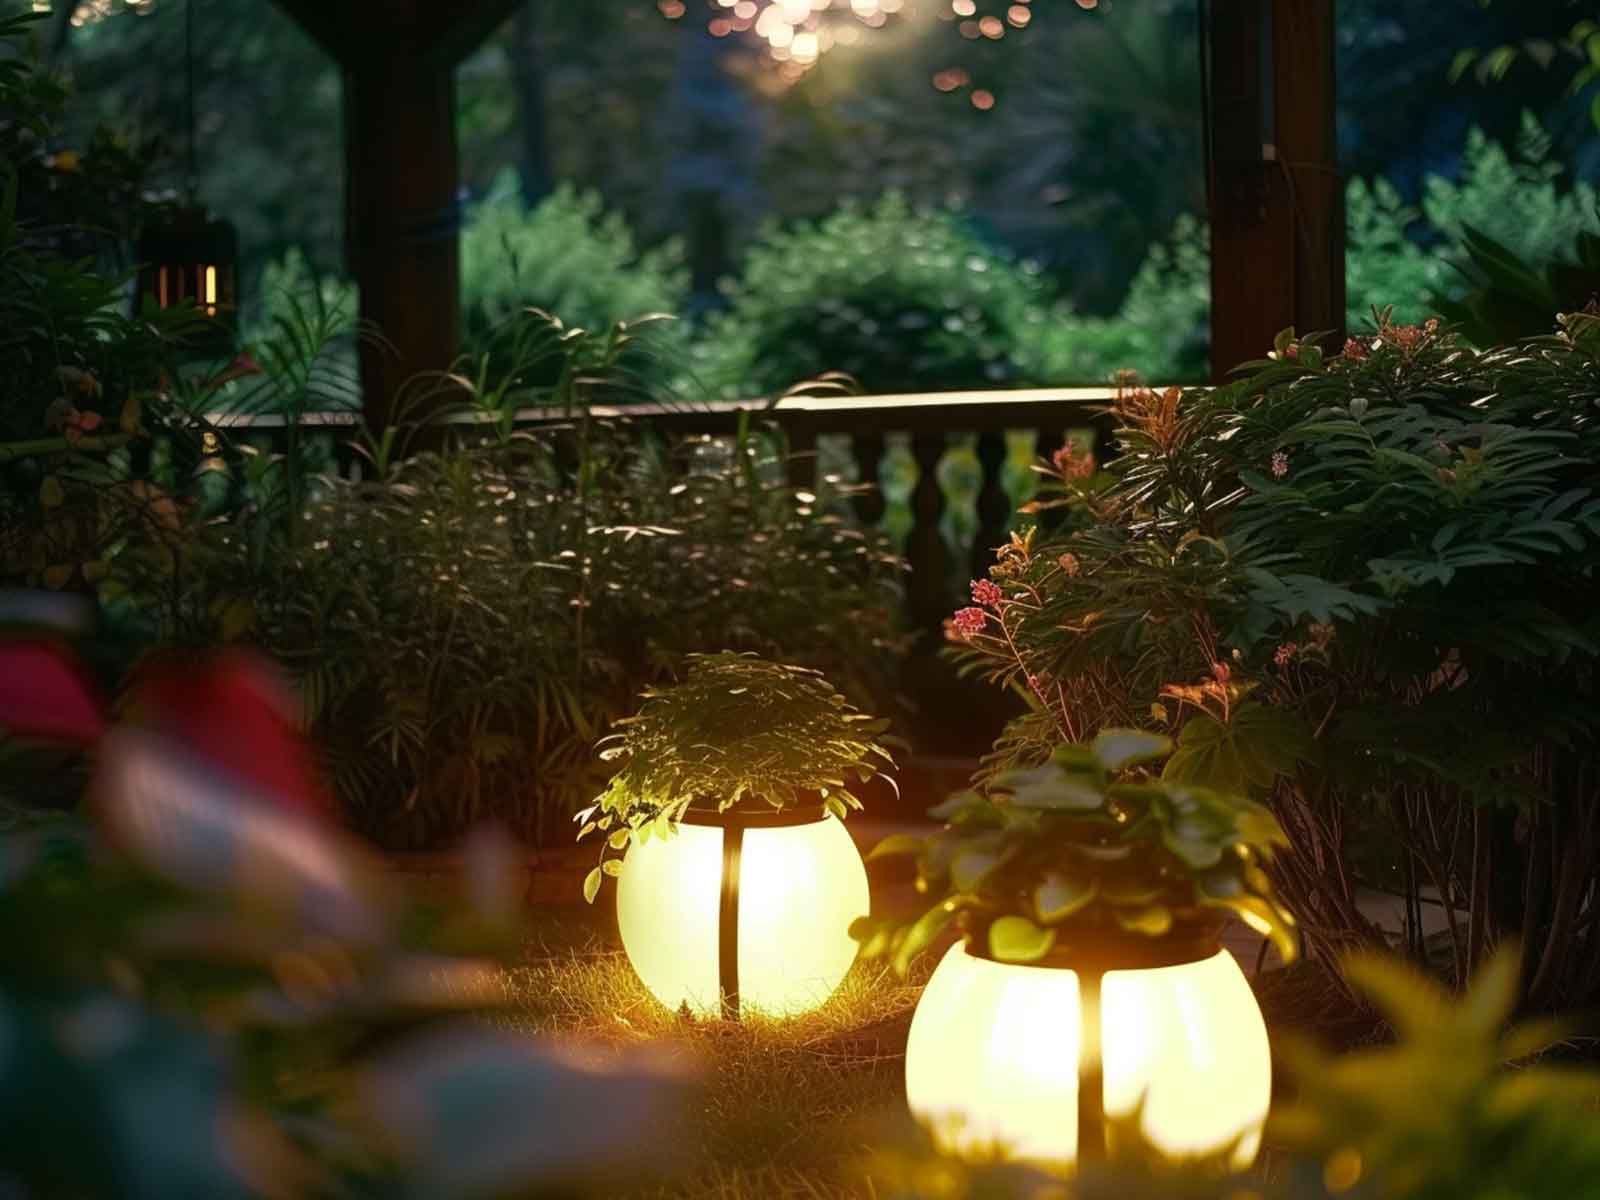 LED garden planters glowing in the midst of a garden